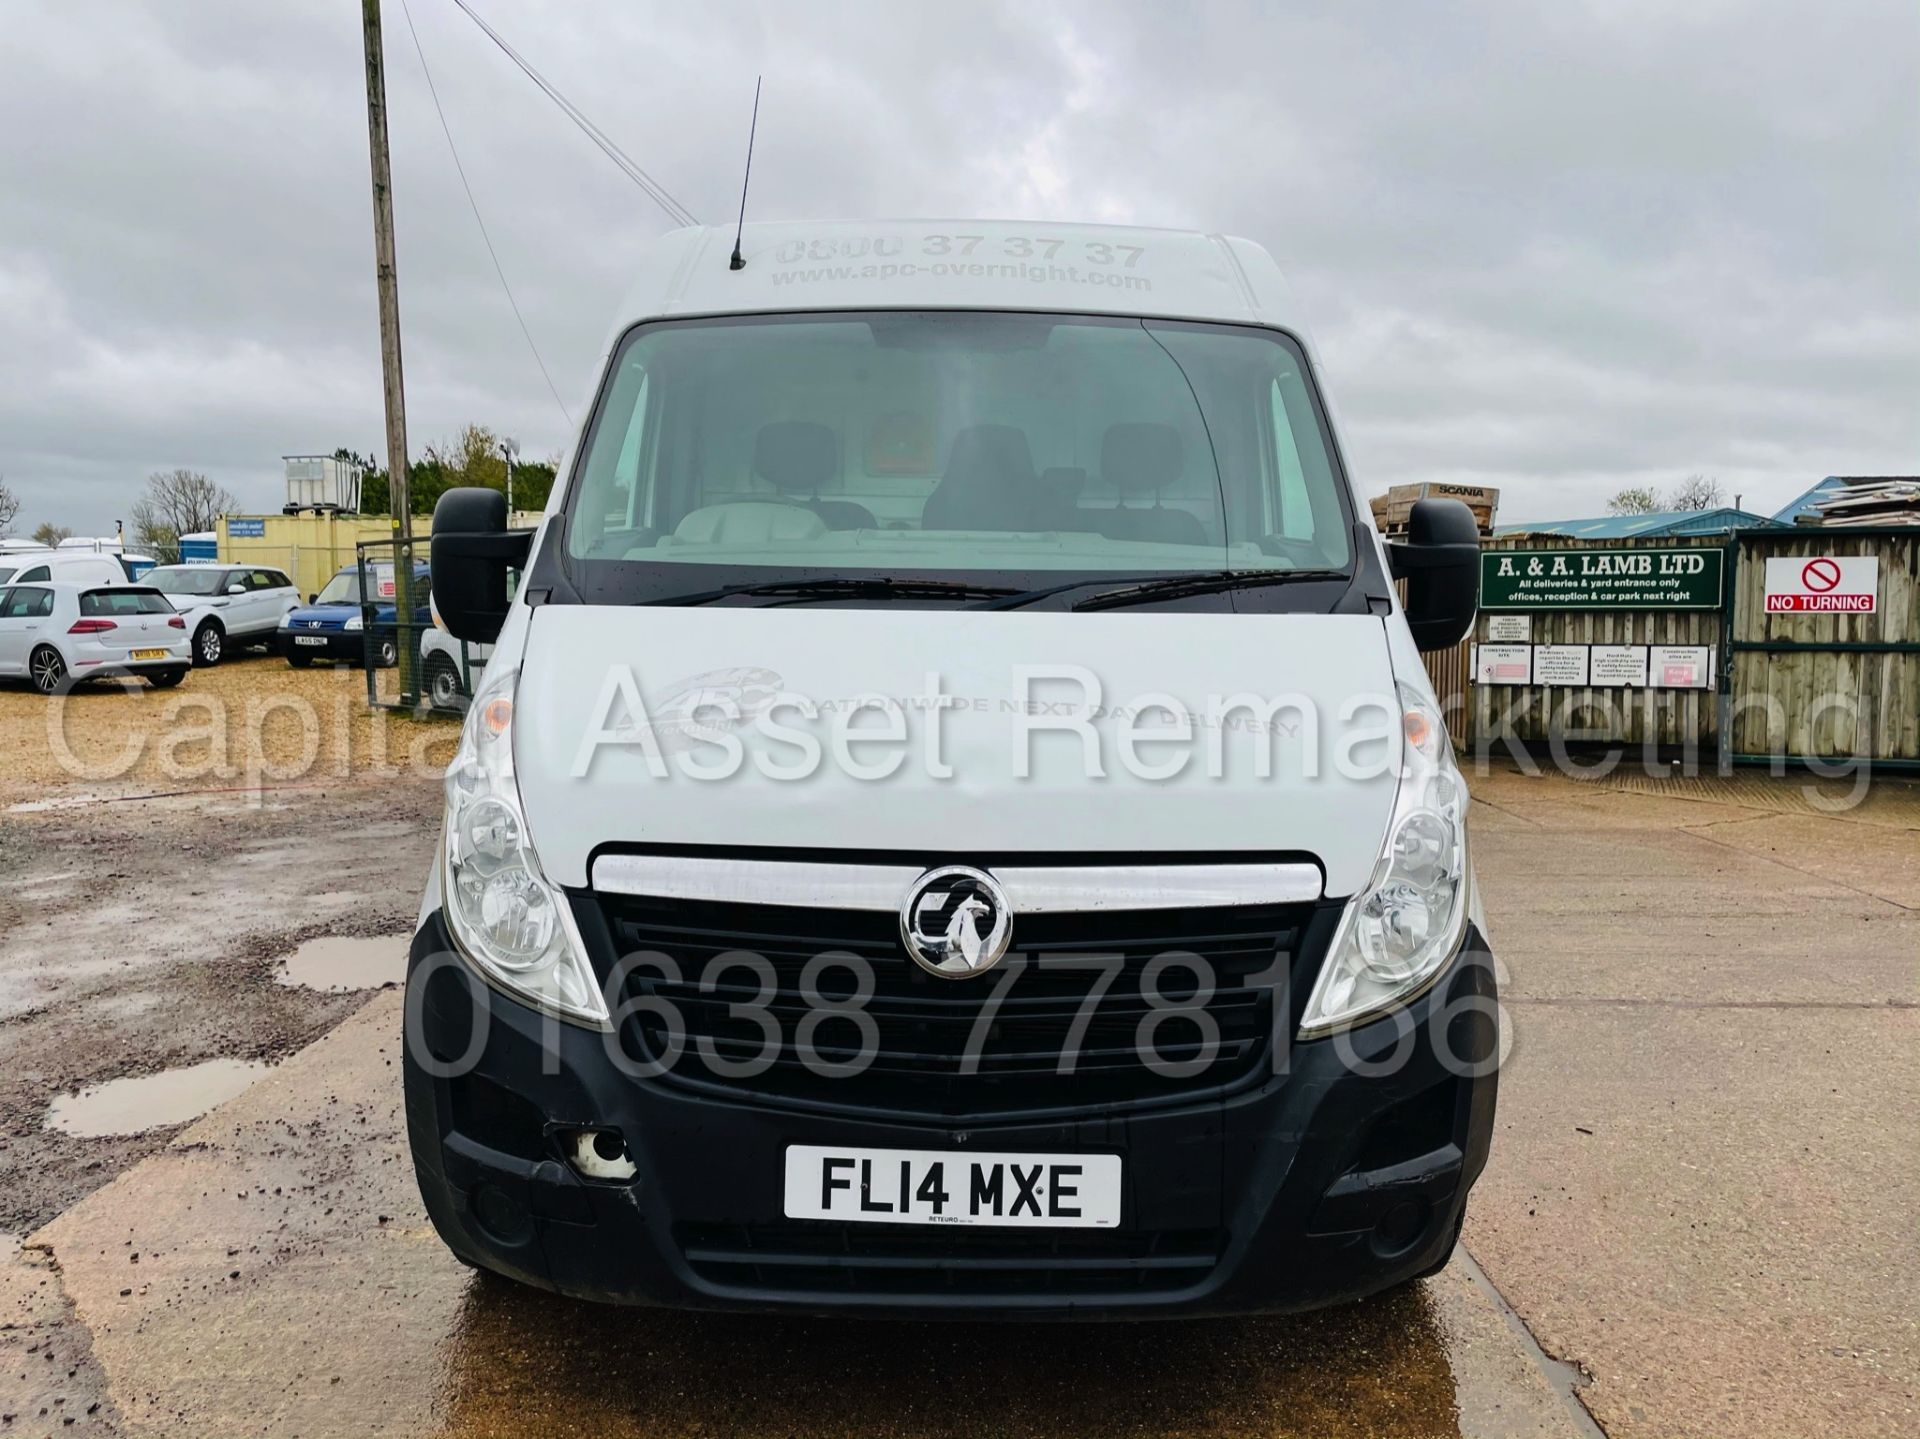 (On Sale) VAUXHALL MOVANO *LWB HI-ROOF* (2014) '2.3 CDTI-125 BHP- 6 SPEED' *1 OWNER* (3500 KG) *A/C* - Image 3 of 29